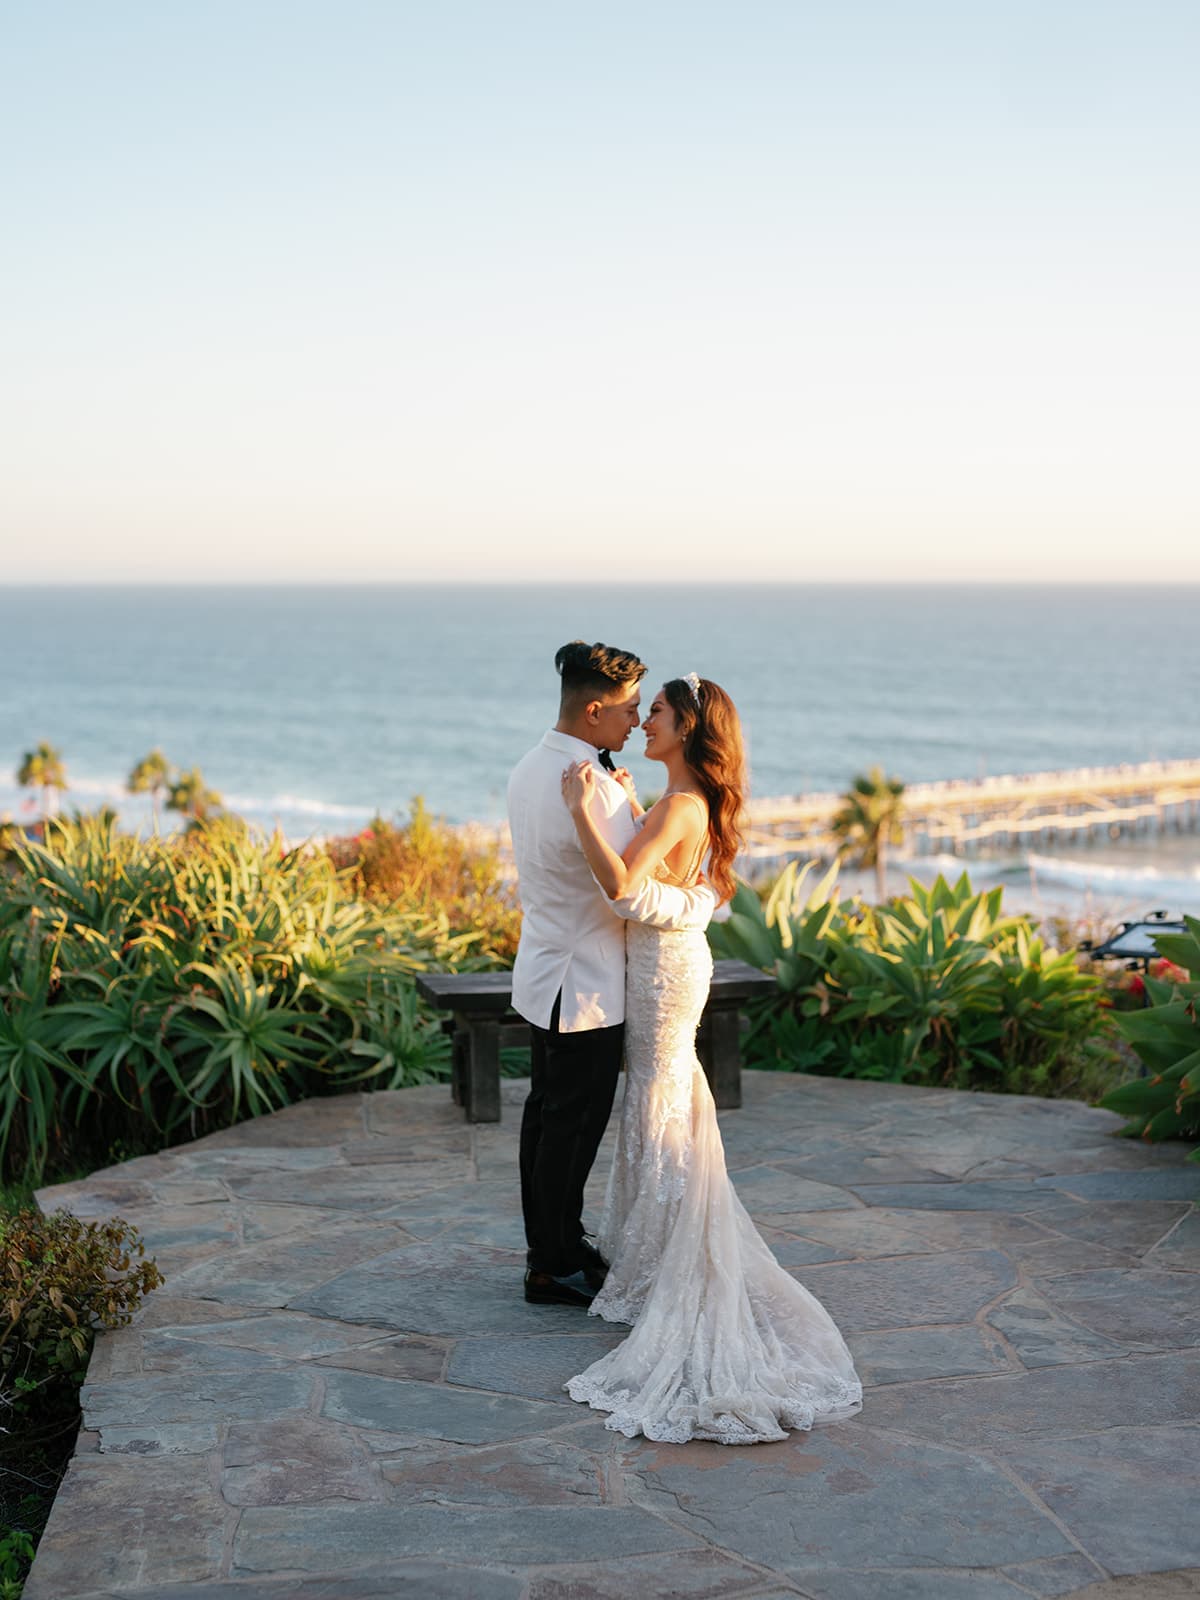 San Clemente wedding couple dances on a patio with ocean views behind them